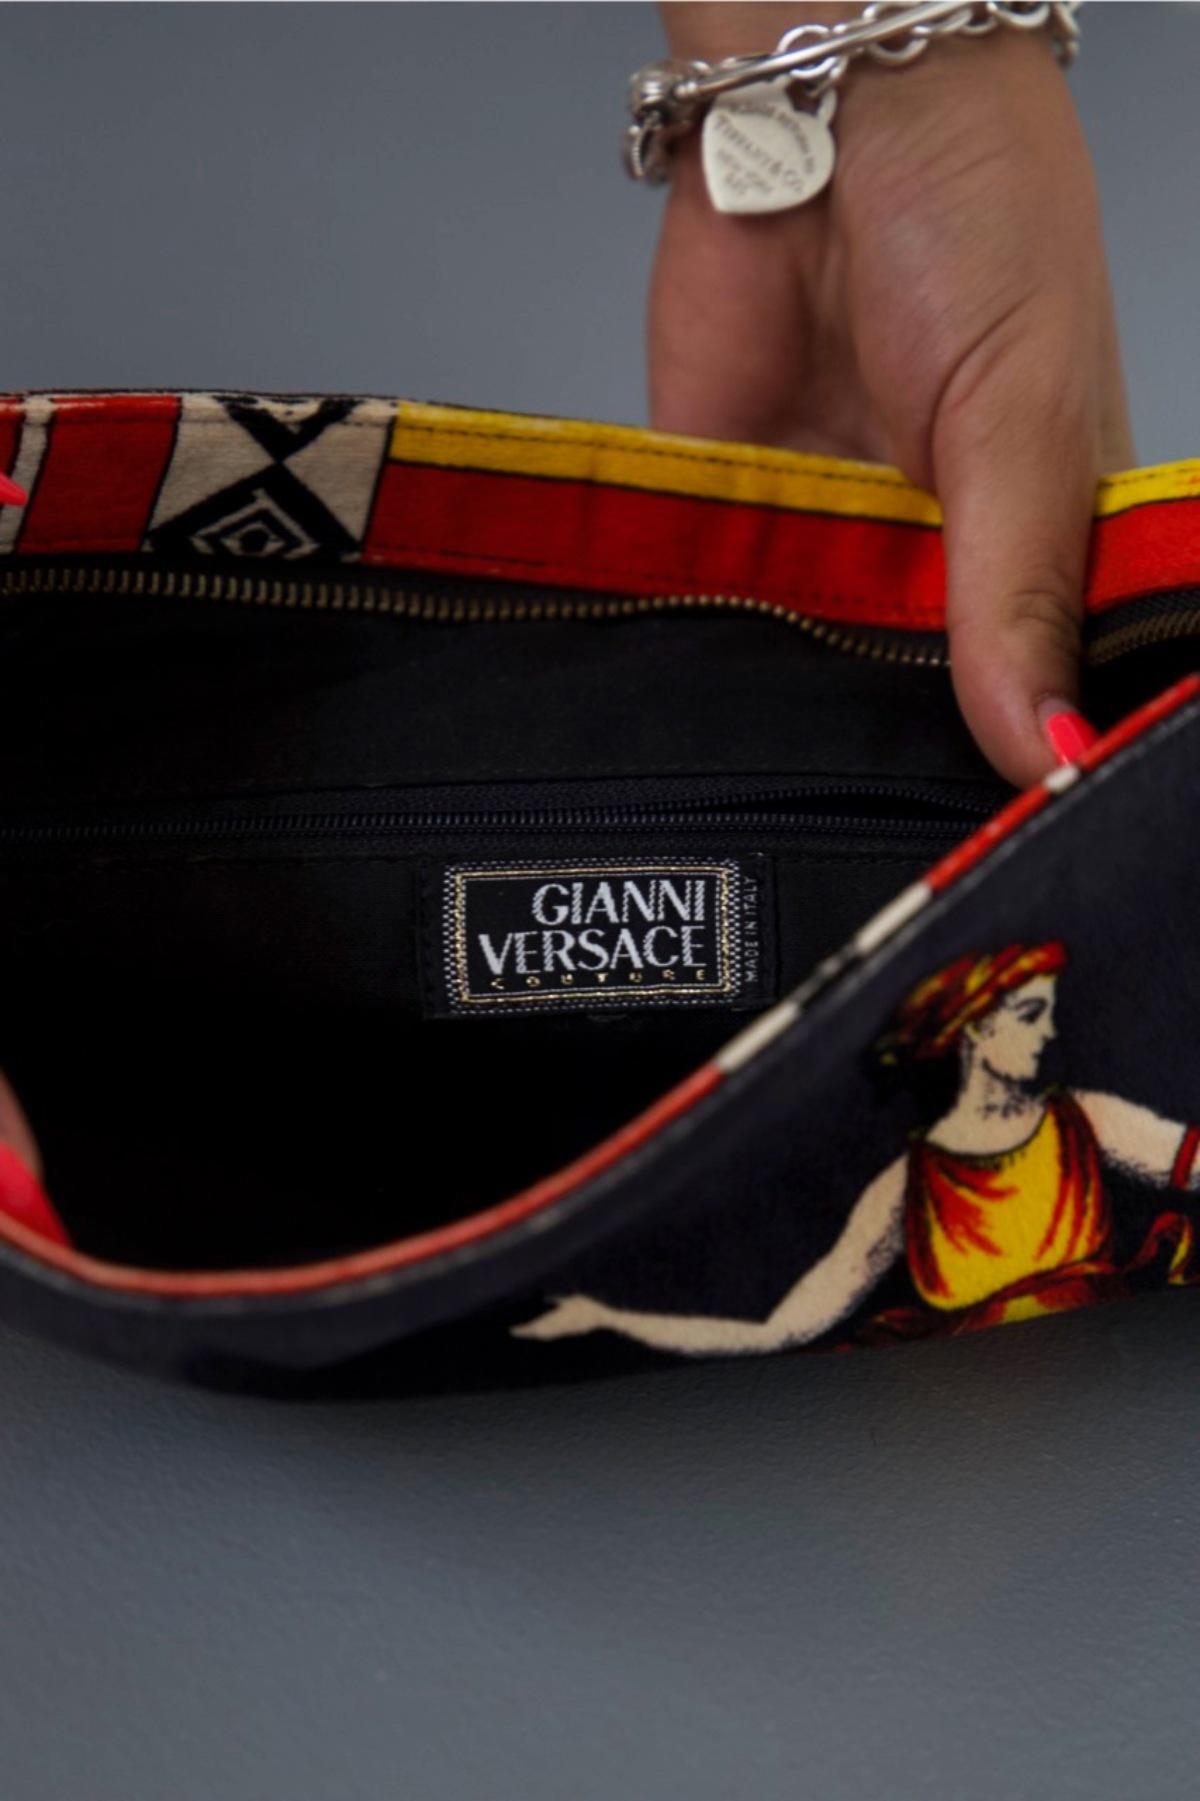 Rare vintage clutch bag designed by Gianni Versace in the 1990s, made in Italy. ORIGINAL LABEL.
The clutch bag is inspired by Greek architecture and art, which Versace translates into prints for his pantheon of fashion items. 
Made entirely of silk